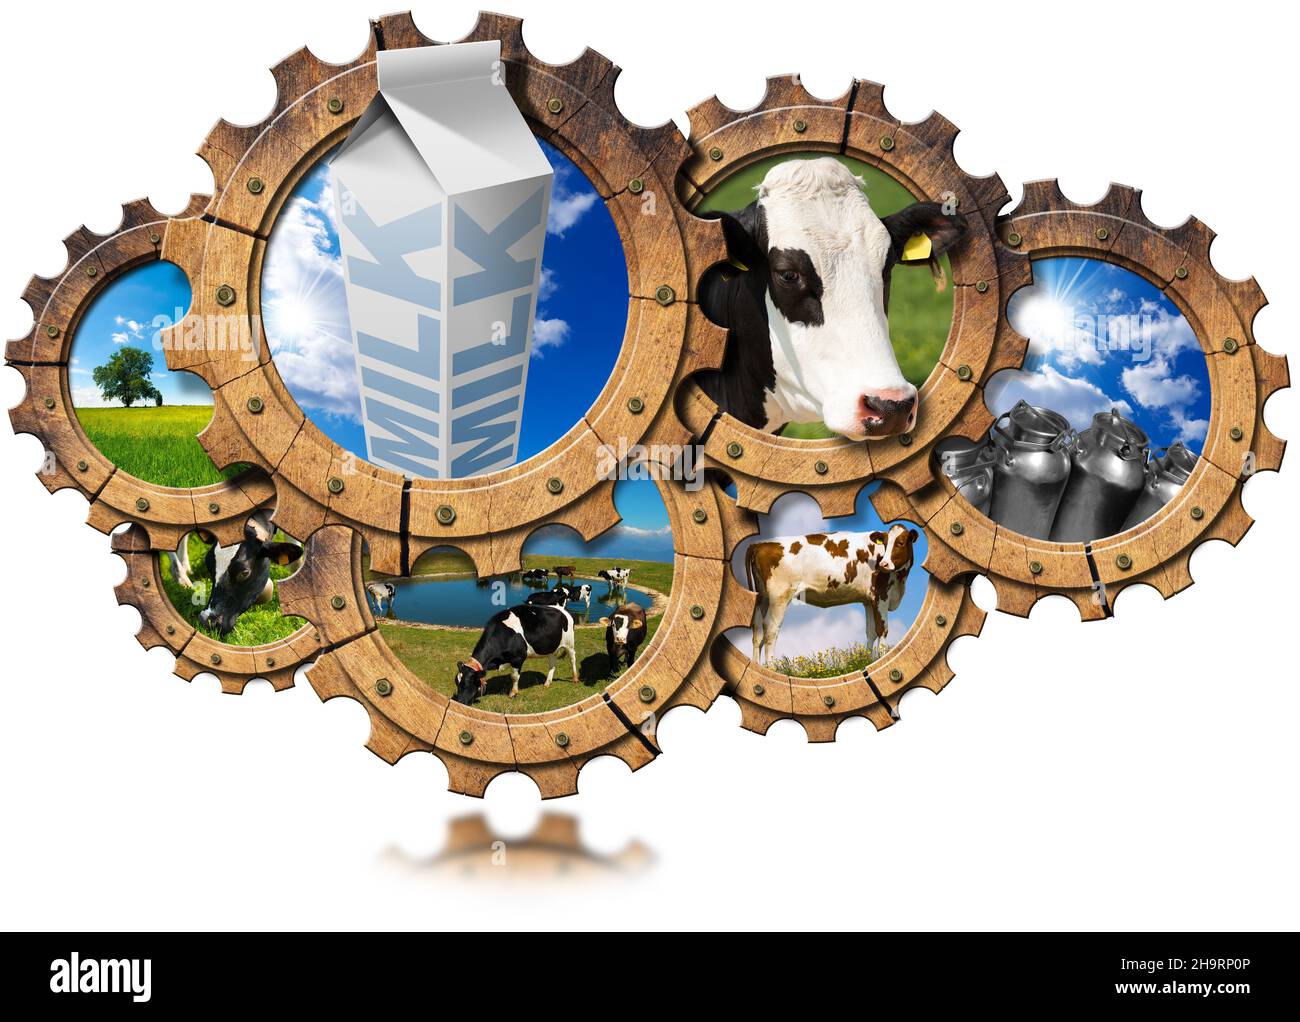 Group of wooden cogwheels with cows, green pasture, cans of milk and white packaging carton of milk, text Milk. Concept of the milk processing. Stock Photo